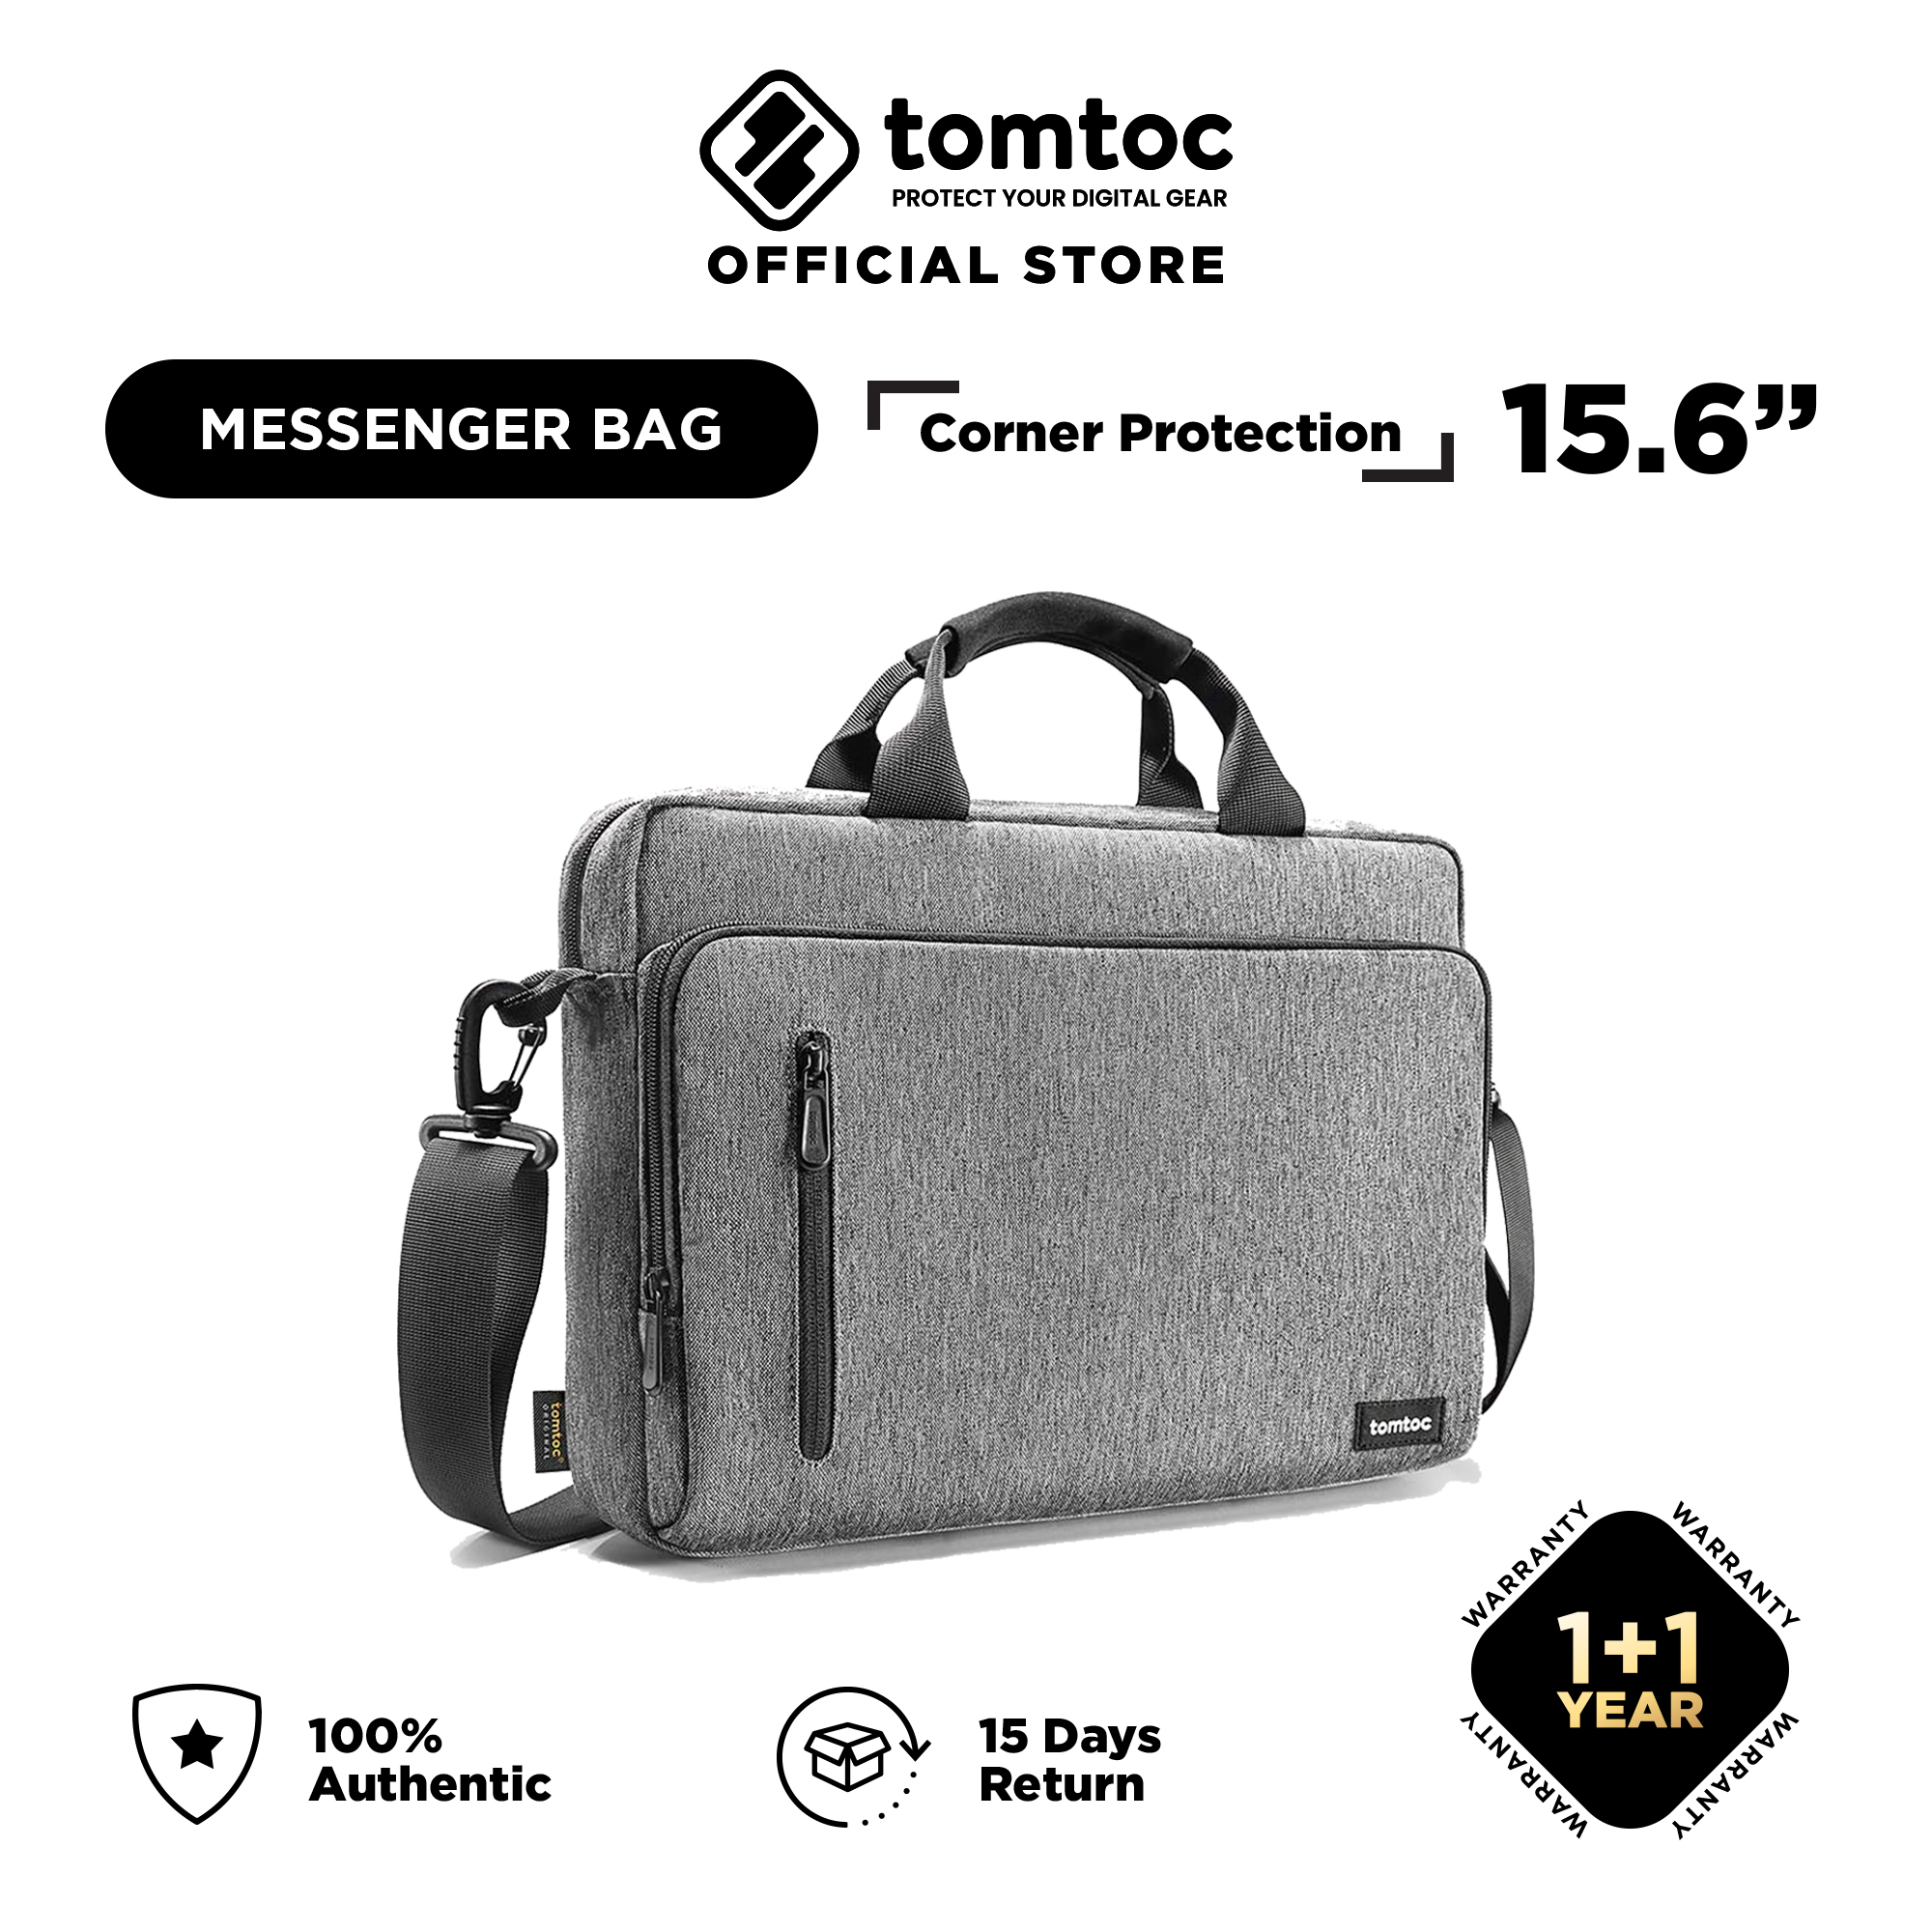 tomtoc Laptop Messenger Bag, Multi-Functional Shoulder Bag Fits Up to 16  inch MacBook Pro, Durable Water-resistant Fabric, Lightweight Carrying bag